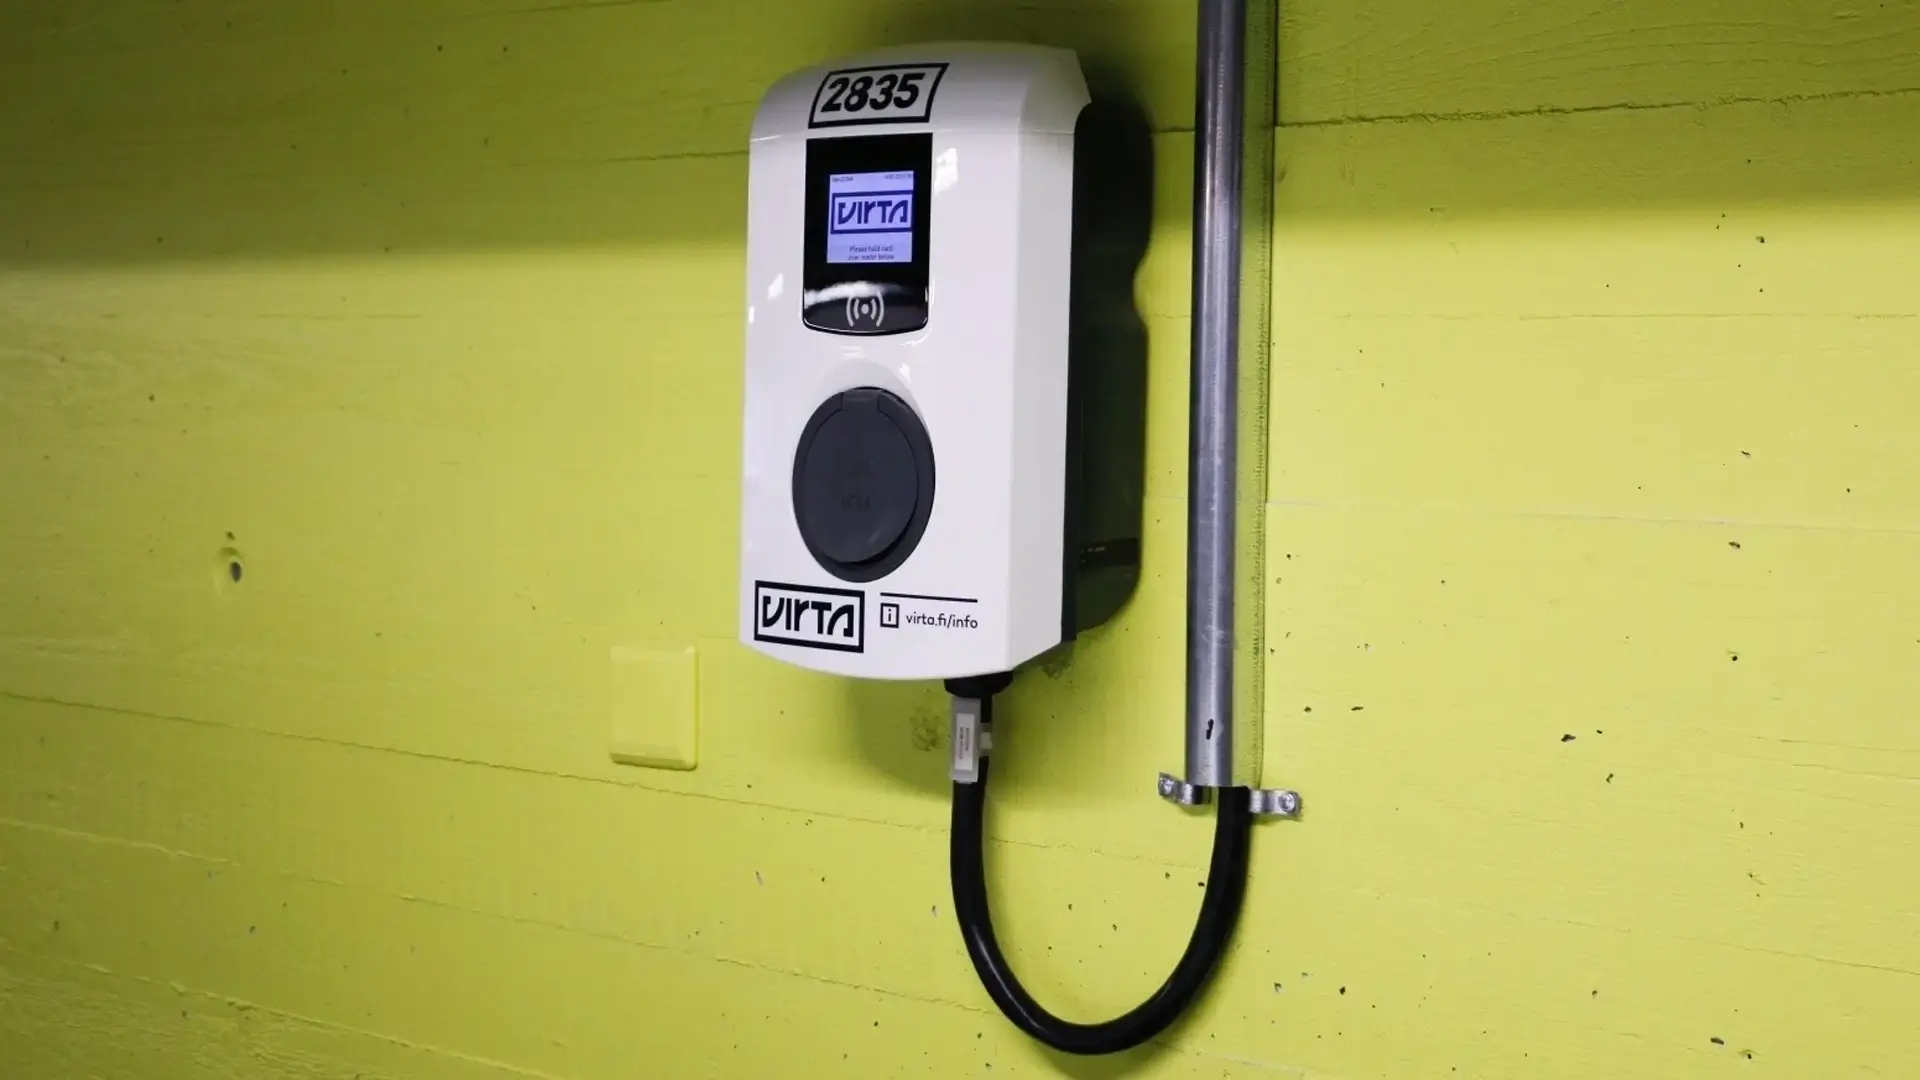 AC charger yellow garage wall